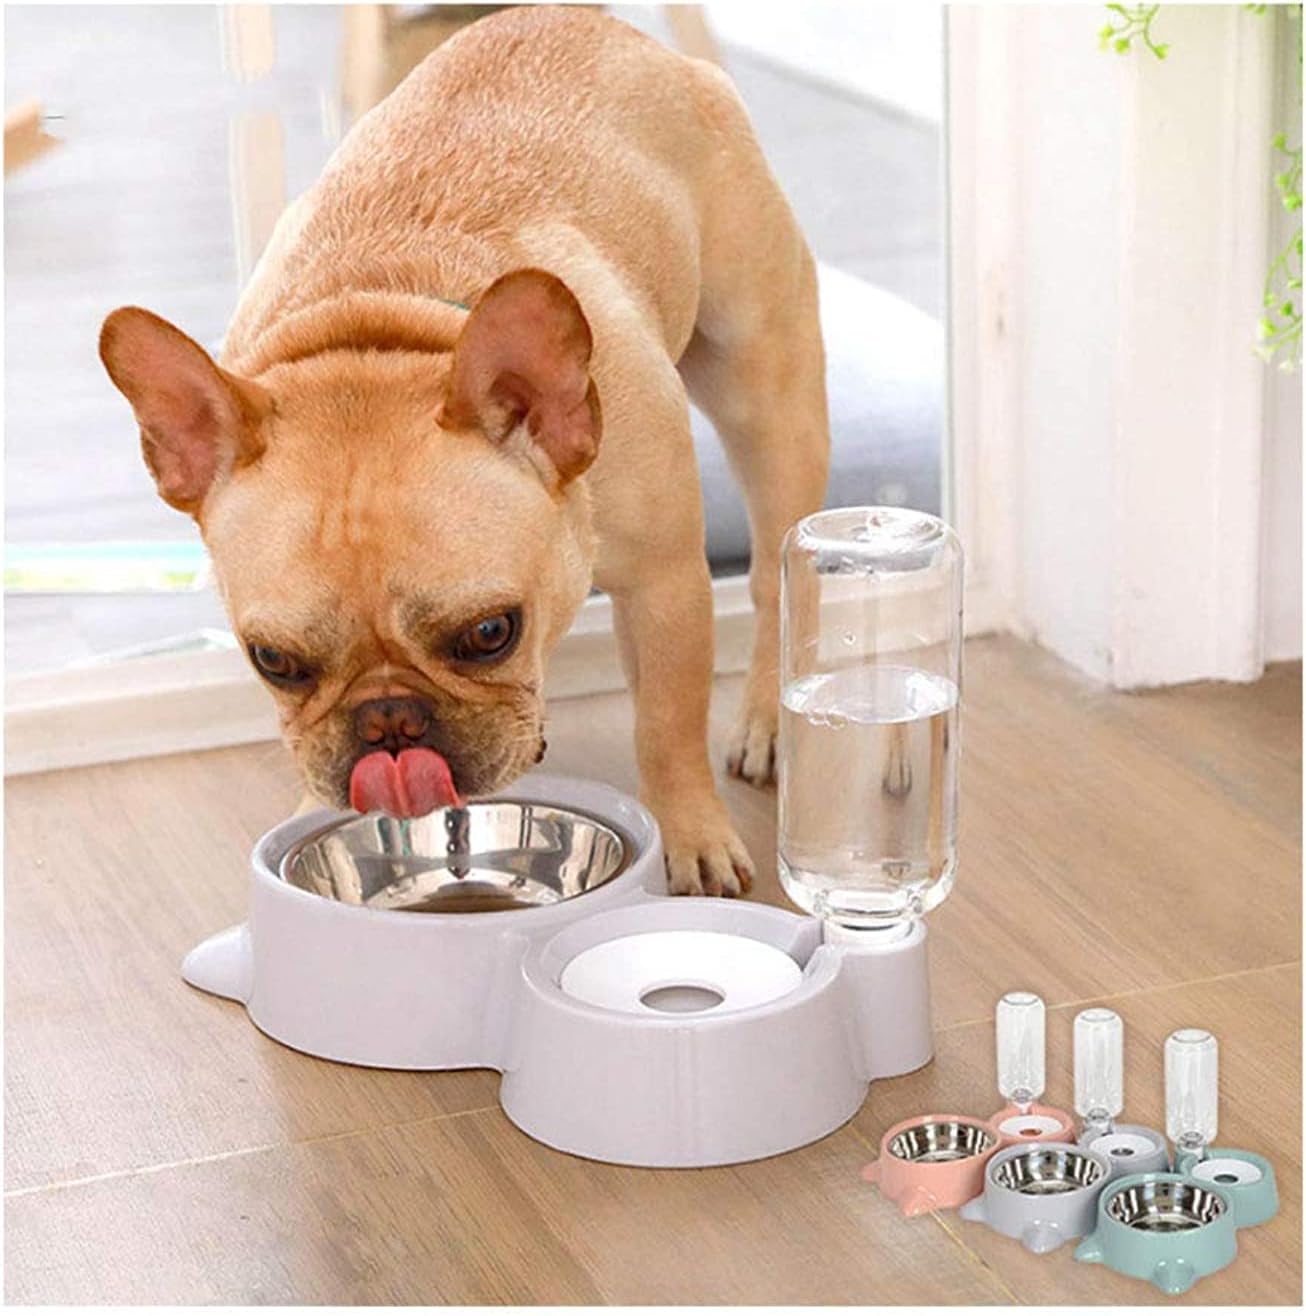 ANTOLE Automatic Water Dispenser Double Dog Bowl Cat Feeding Station Stainless Steel Water and Food Bowls Quality Dog Bowl Holder for Dogs Cats